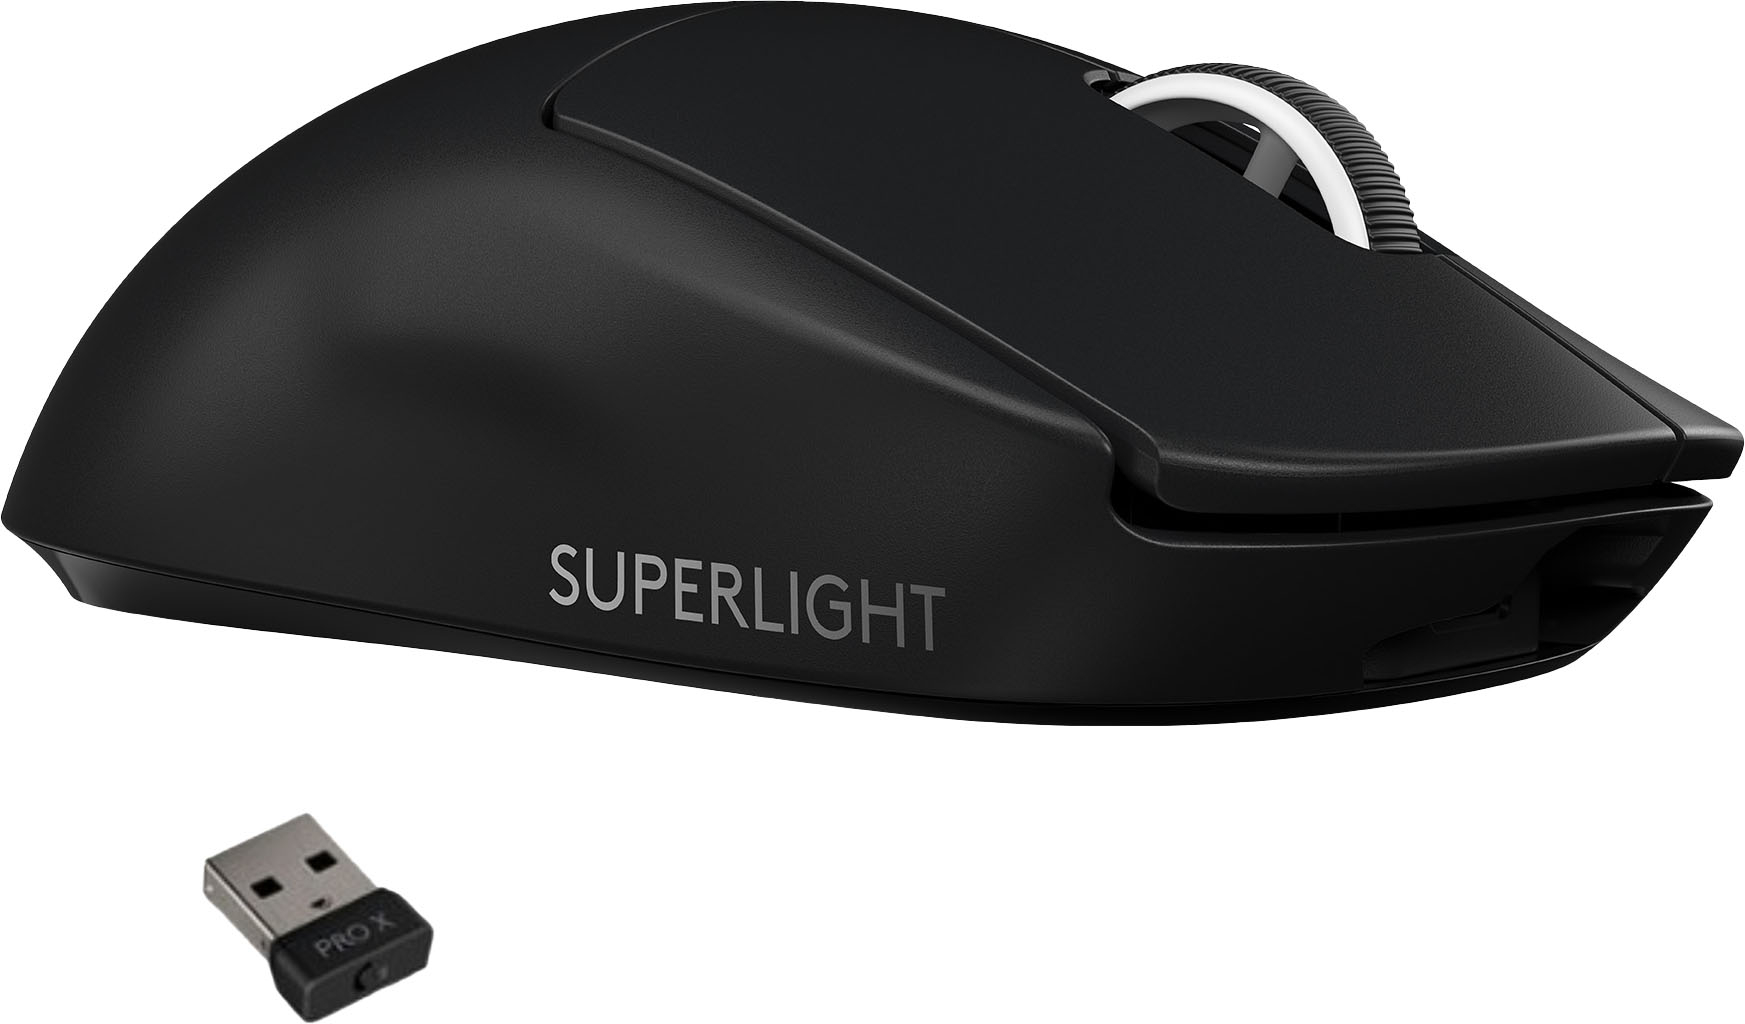 Logitech PRO X SUPERLIGHT Wireless Optical Gaming Mouse with HERO 25K Black 910-005878 Best Buy